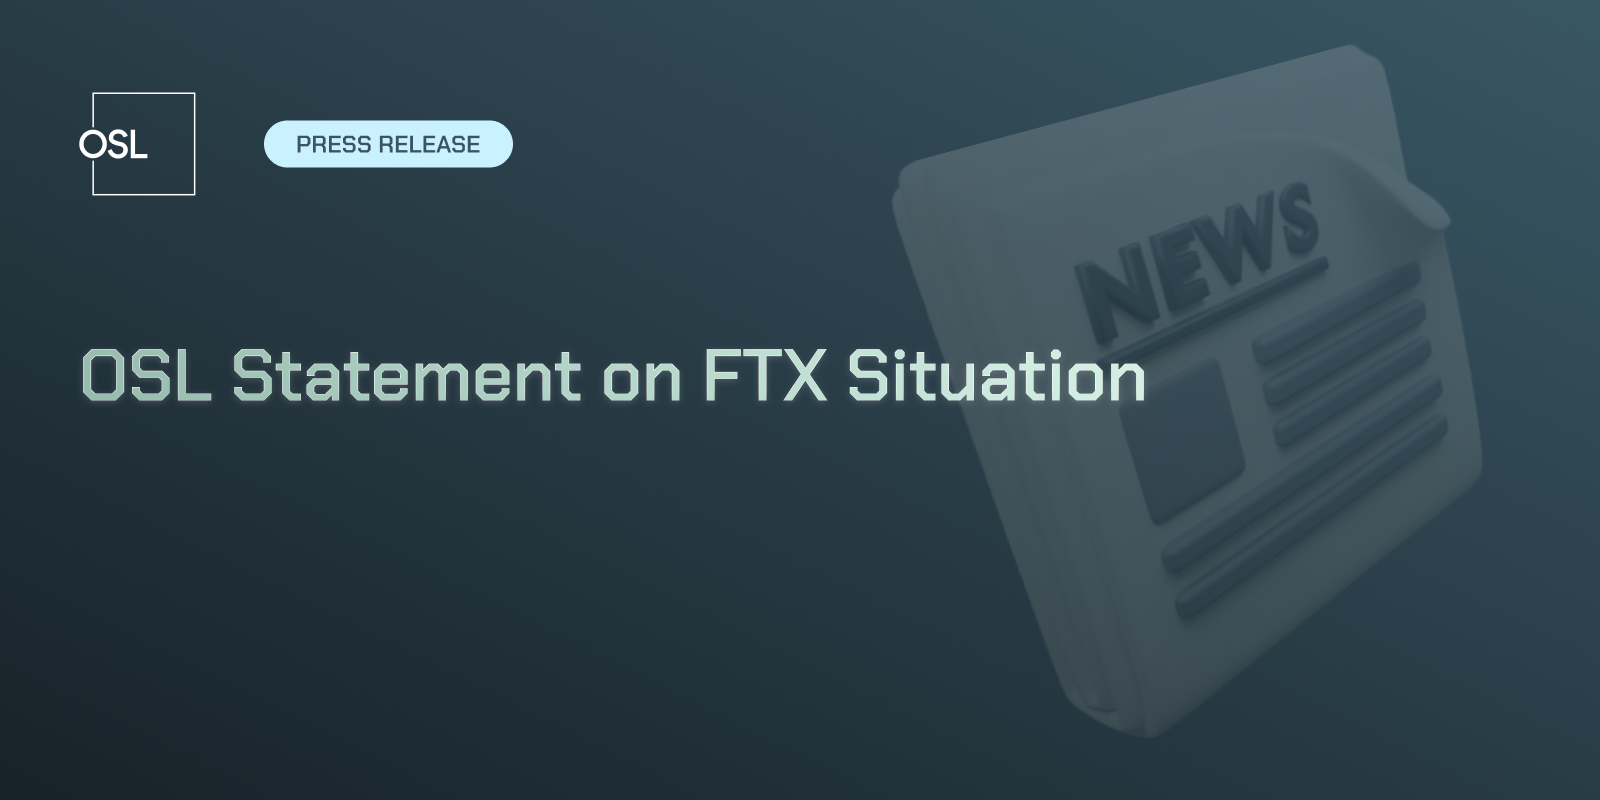 OSL Statement on FTX Situation